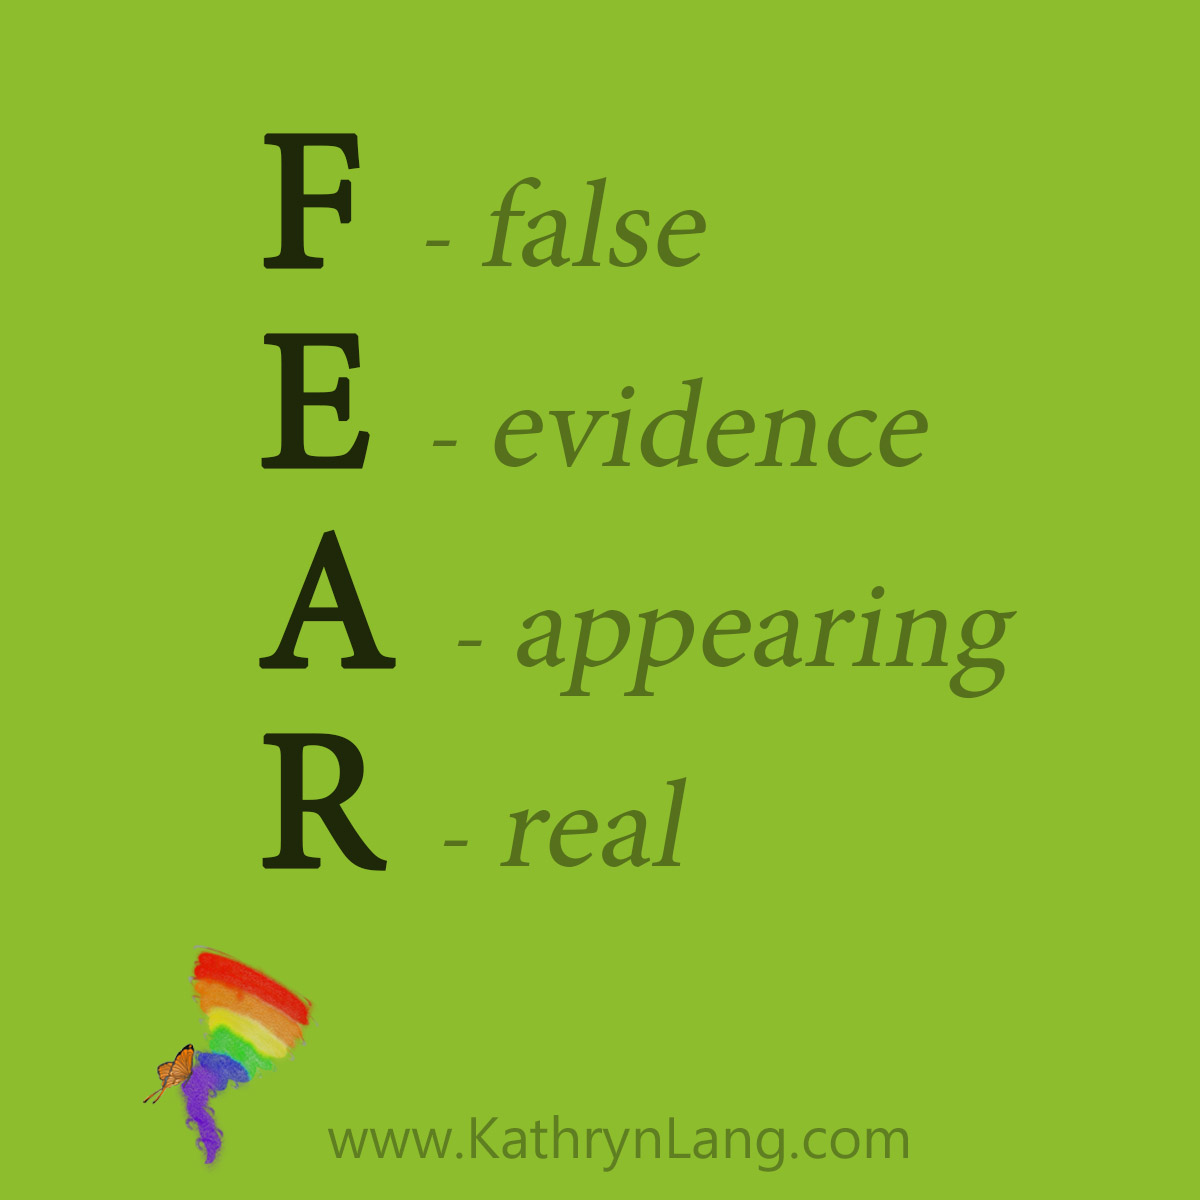 Fear: False Evidence Appearing Real